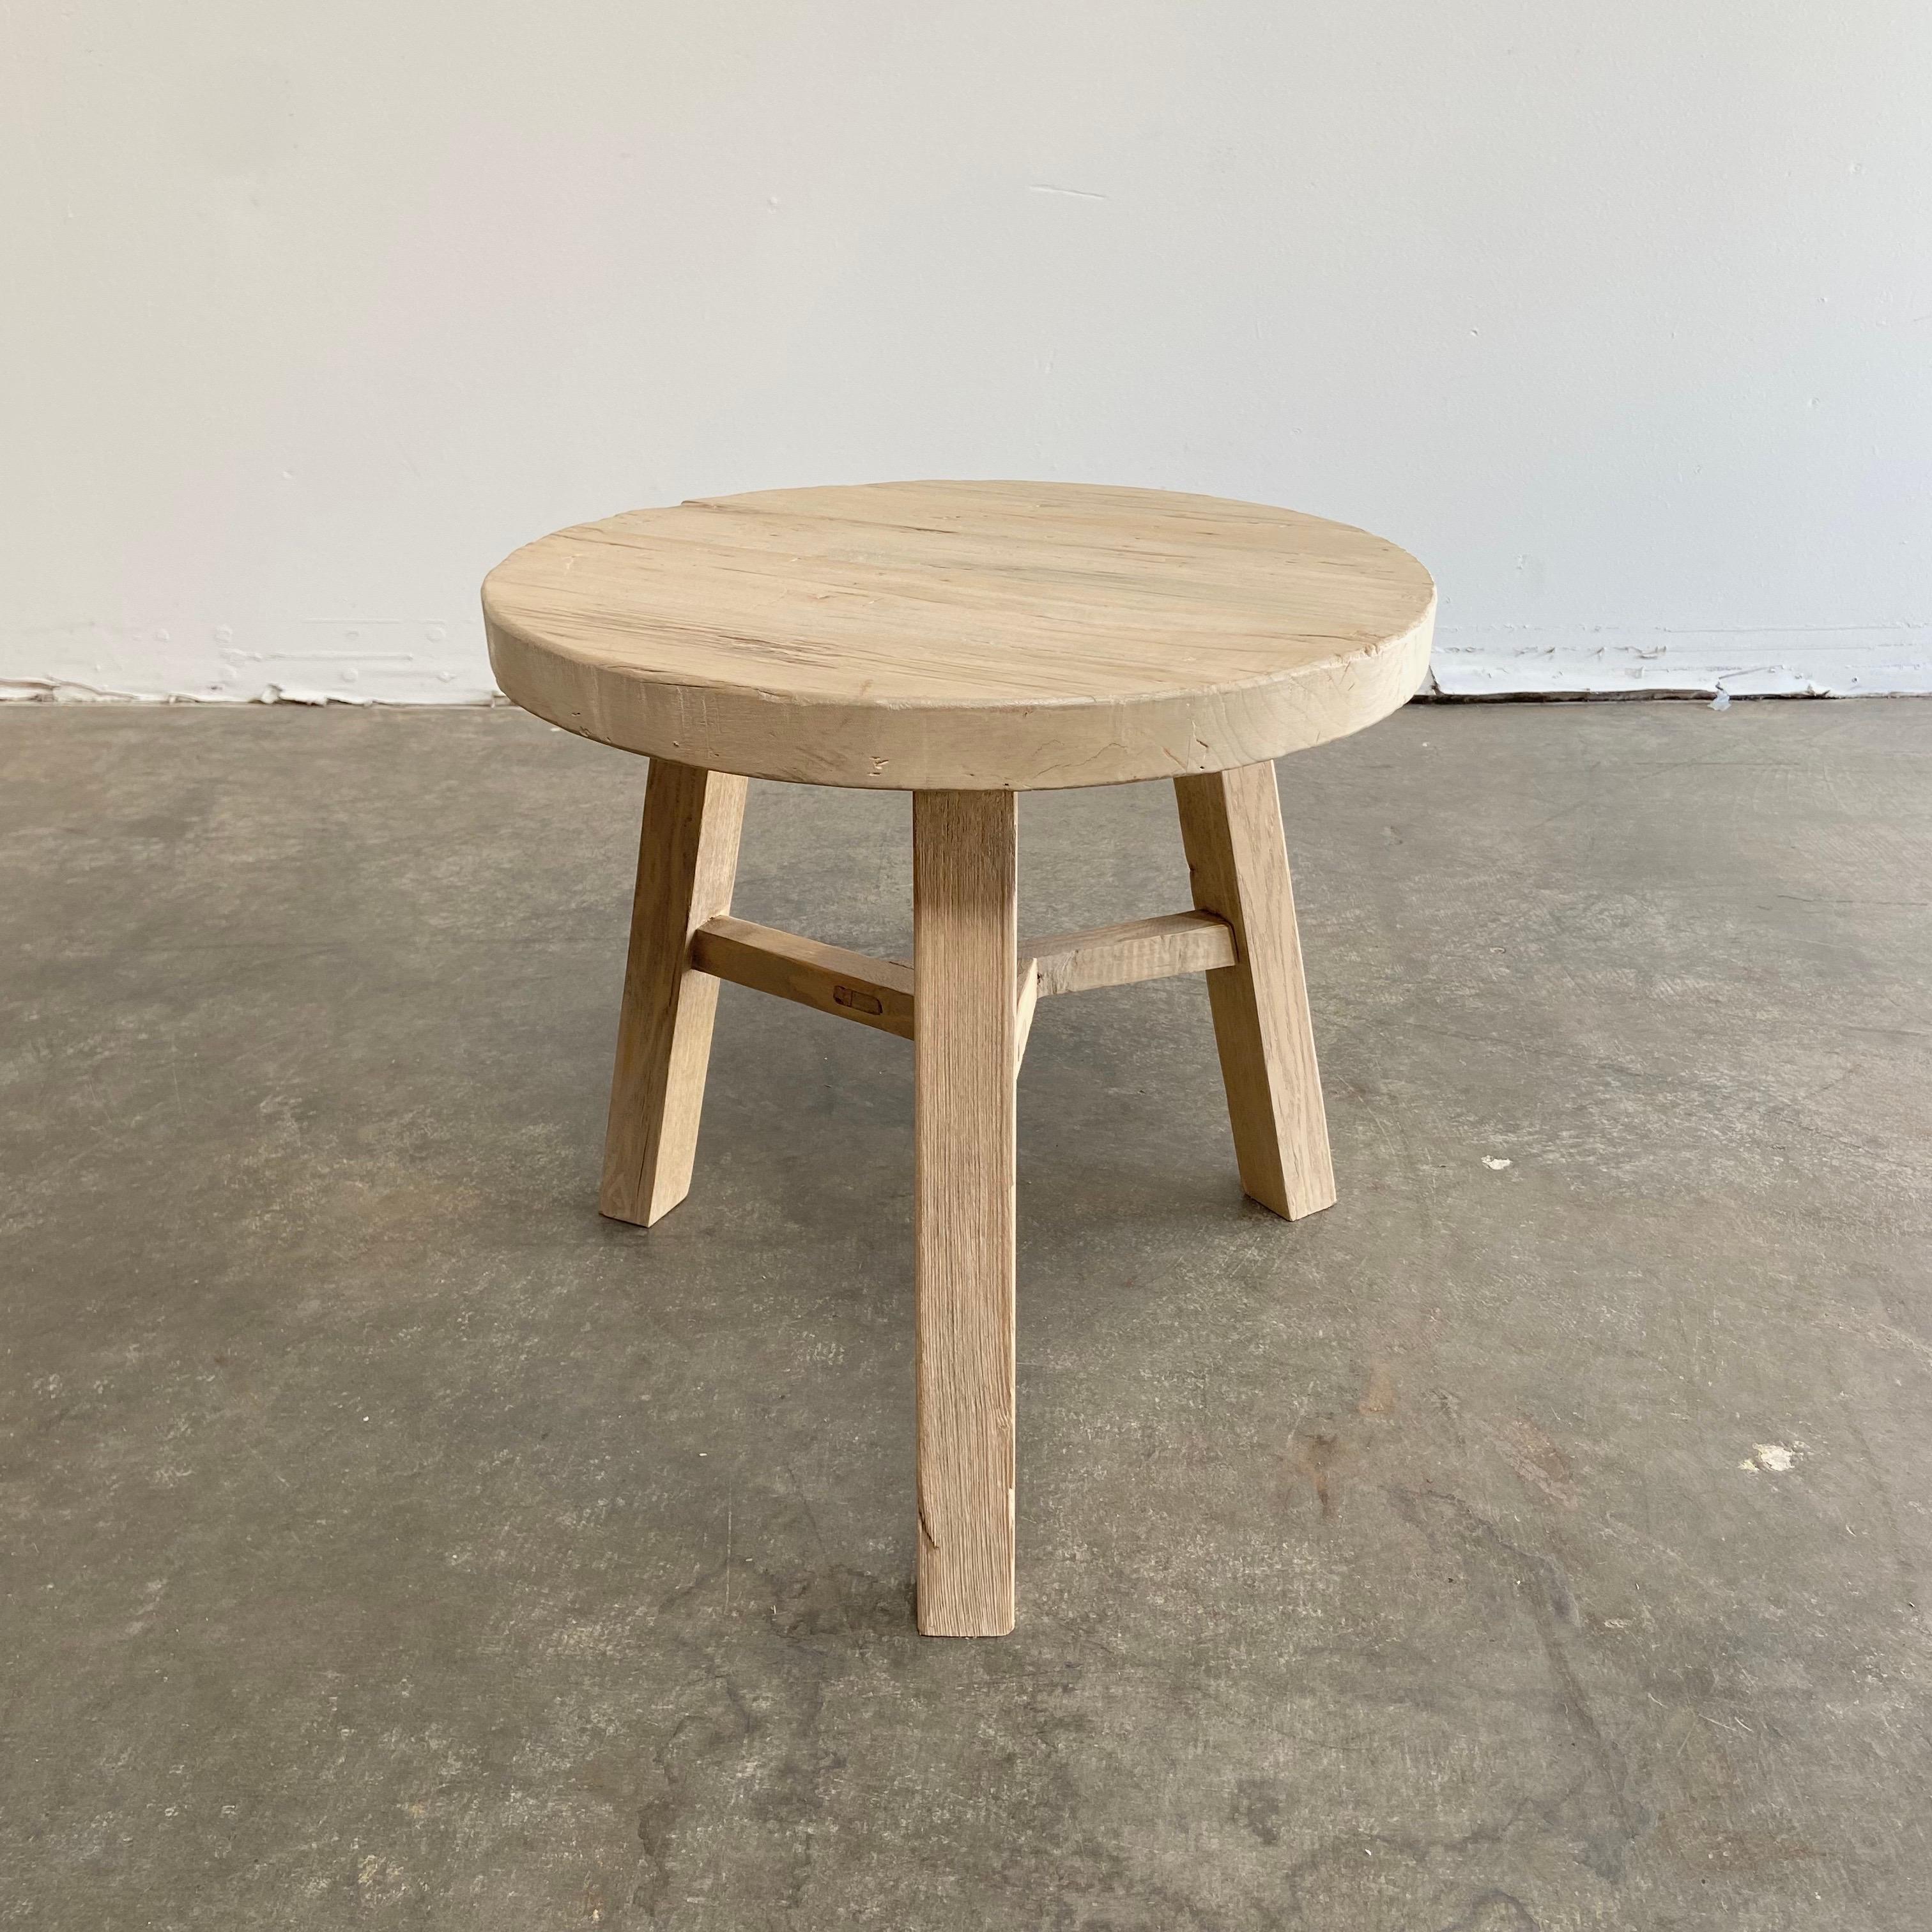 Round natural side table made from reclaimed elm wood raw natural finish, a warm honey with gray tones in the wood. Solid and sturdy, a great side table for next to a bed, sofa, chairs. Can be stained or painted for a customized look
 Size: 20” RD